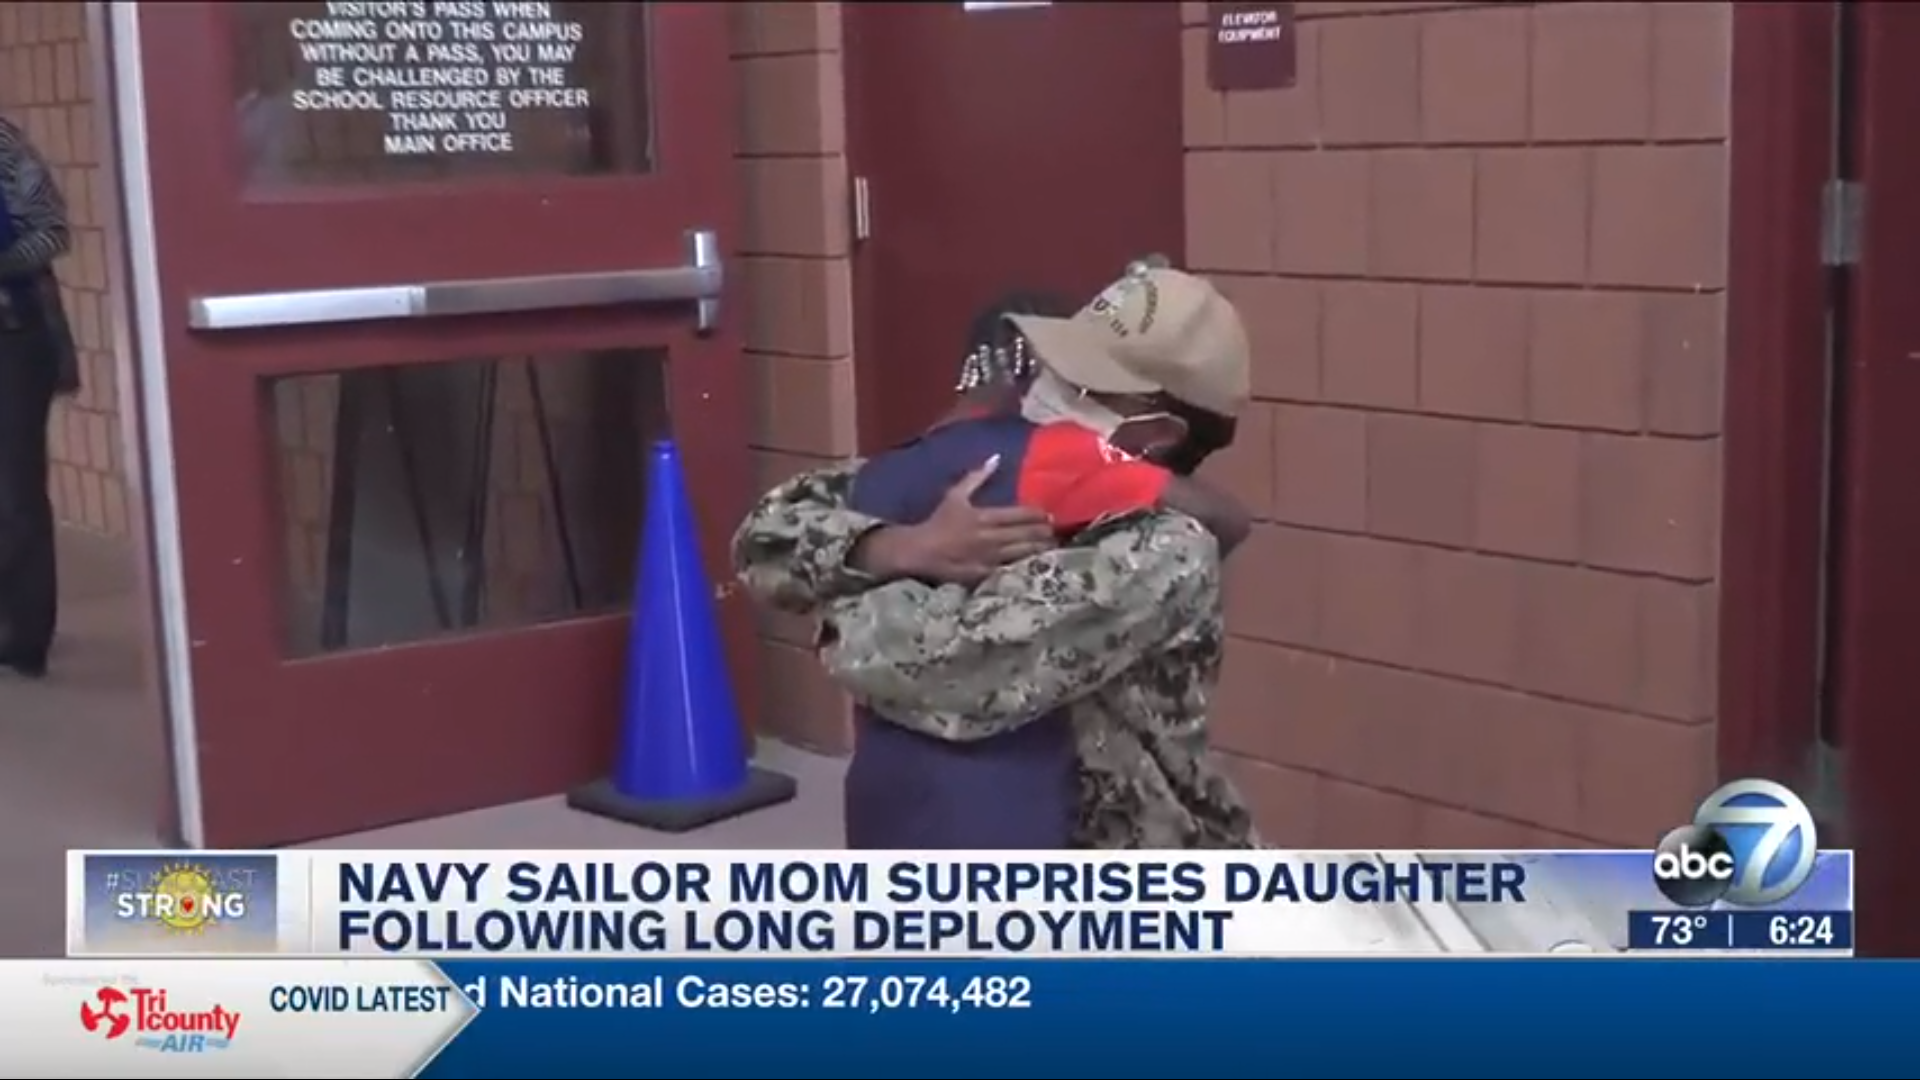 Suncoast Navy Sailor Mom Surprises Daughter Following Long Deployment The Suncoast News And Scoop 2271